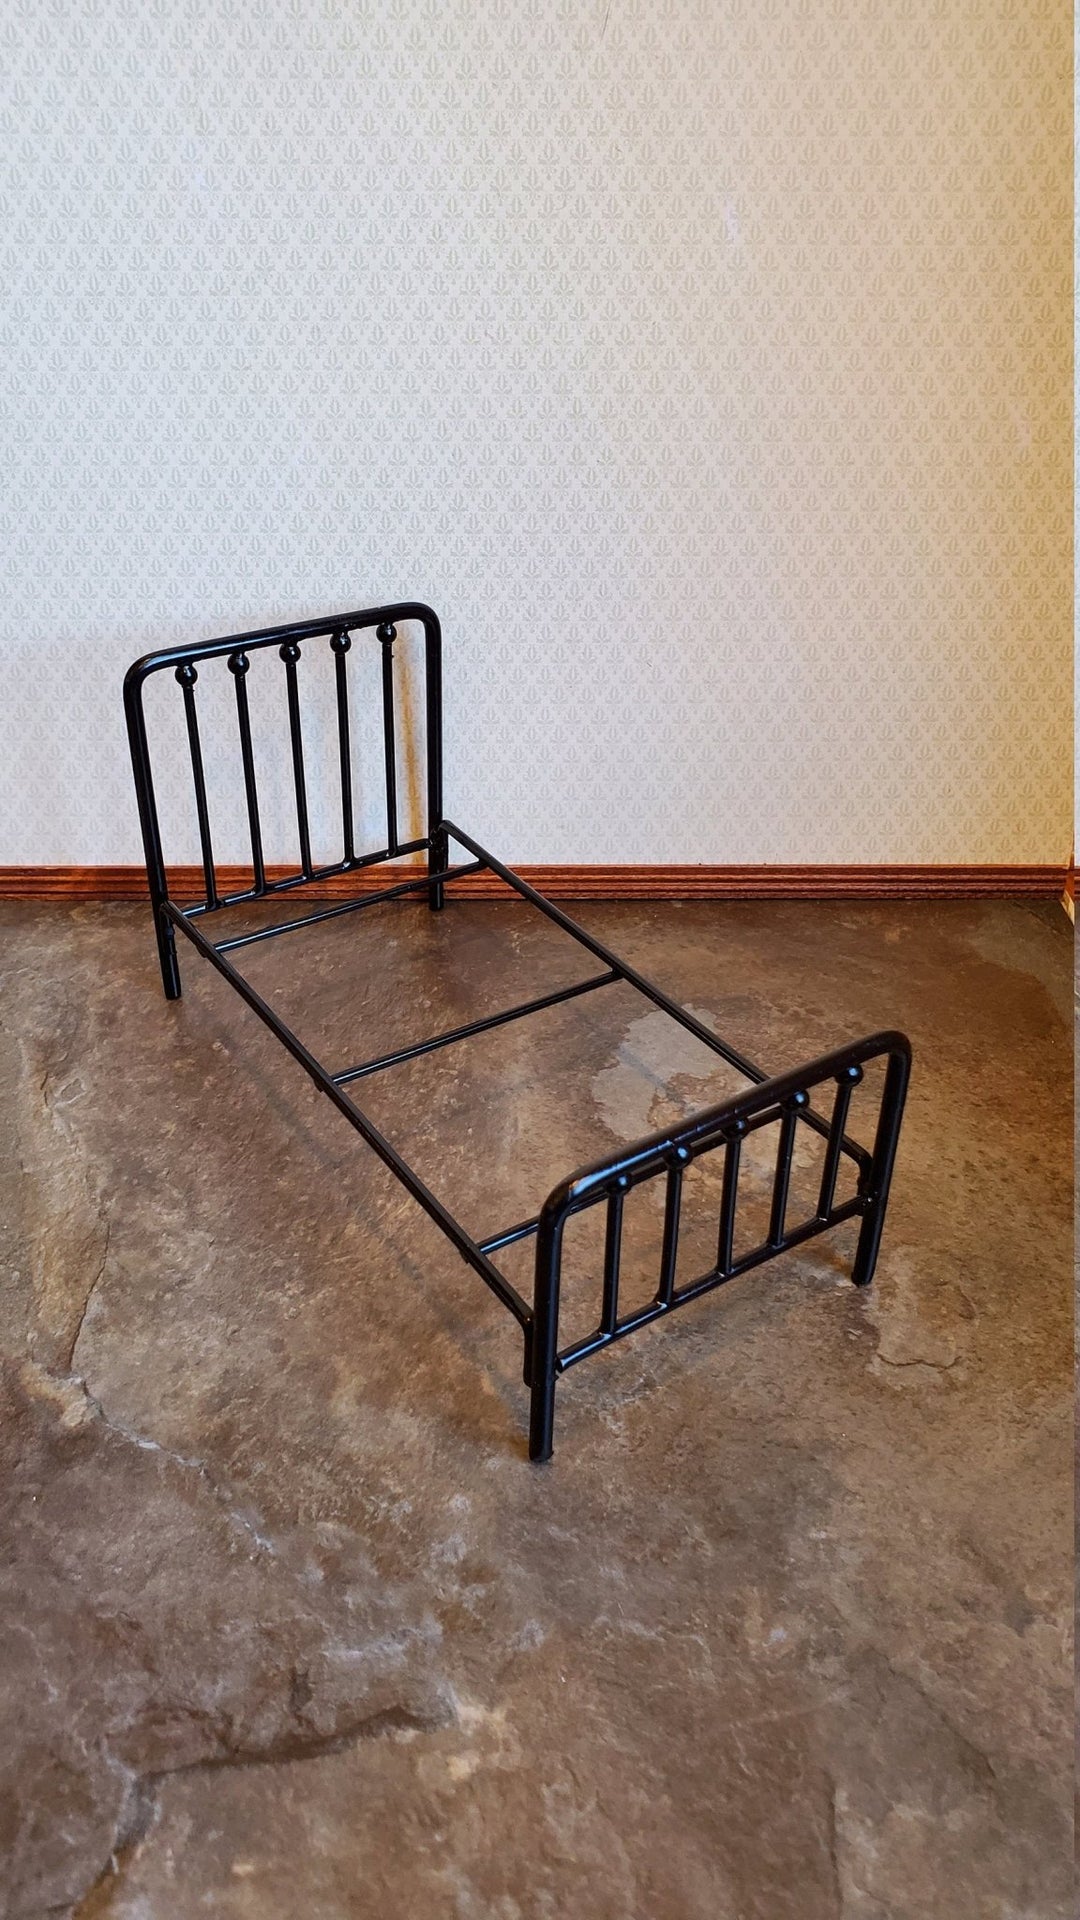 Dollhouse Miniature Bed Black Metal with Mattress Pillow Blanket 1:12 Scale Furniture - Miniature Crush